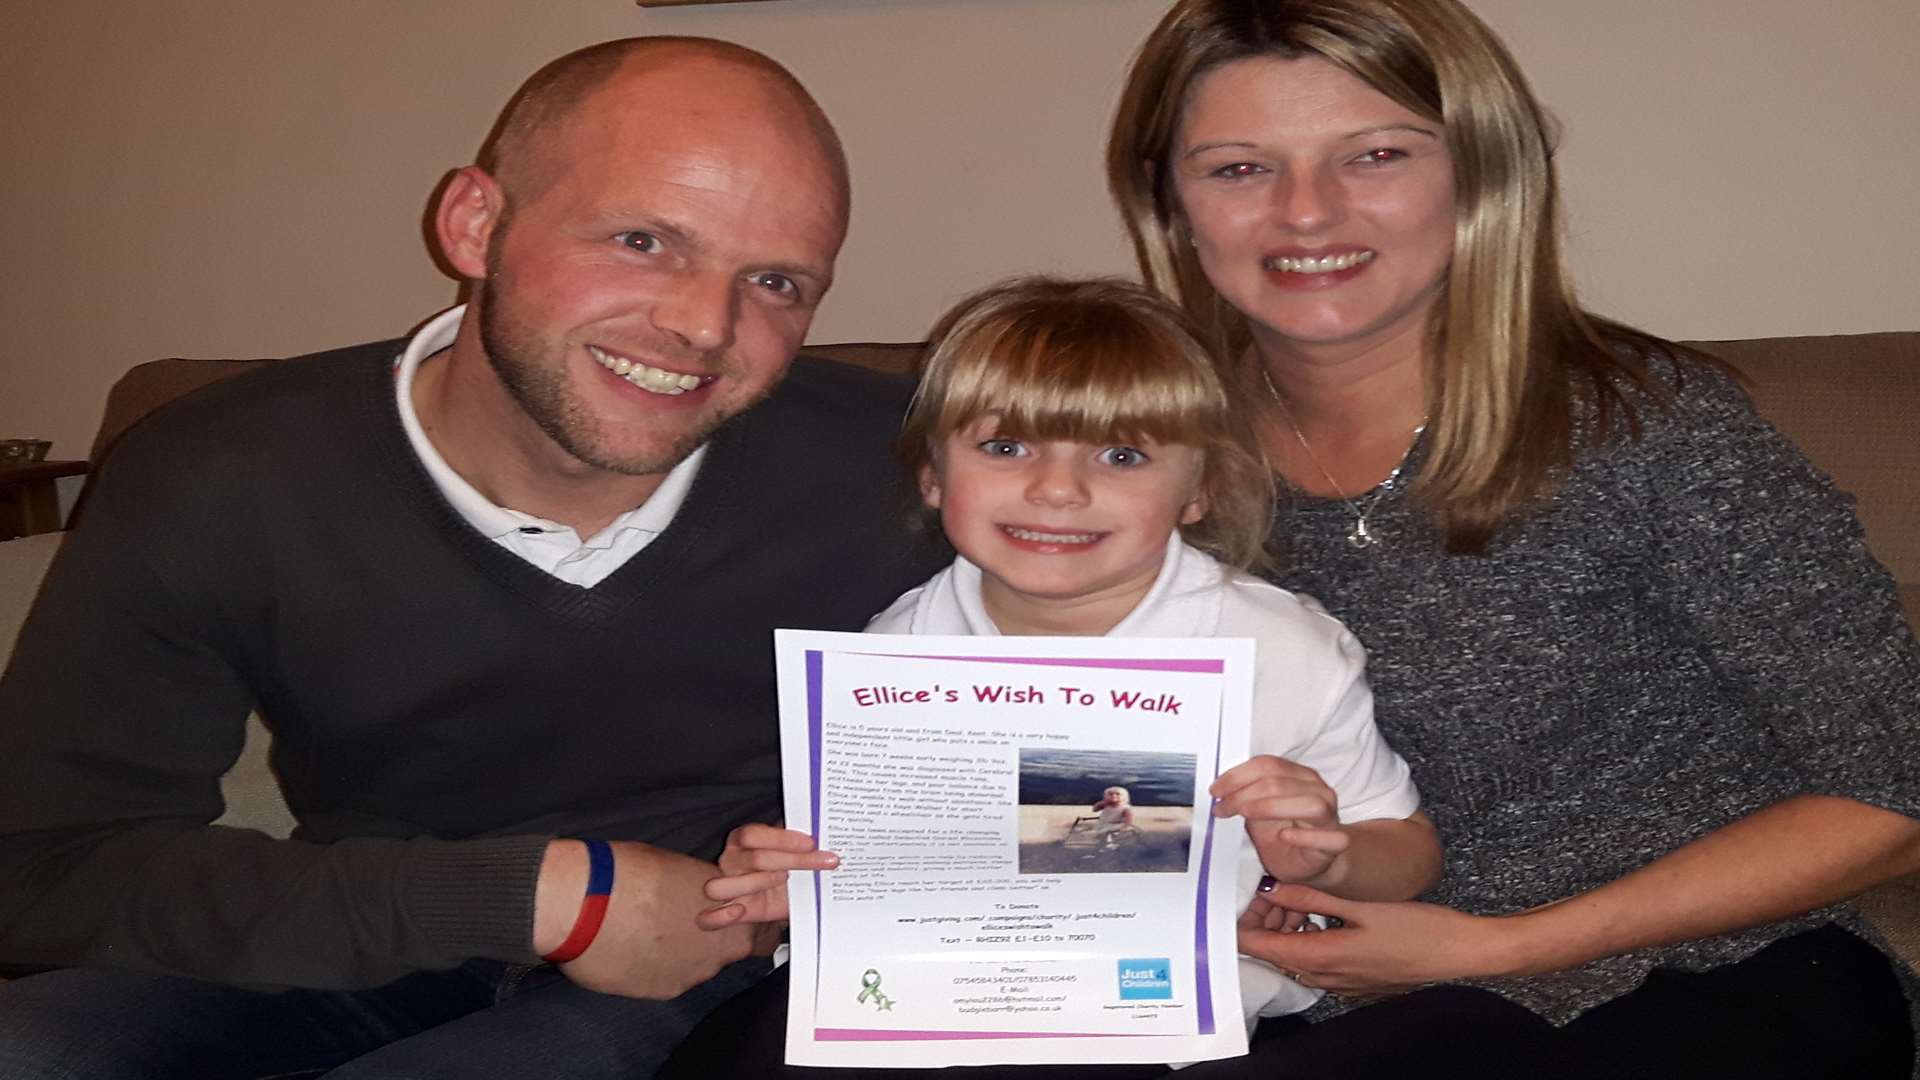 Joe and Amy Barr have launched an appeal to raise £65,000 for life changing SDR surgery for their daughter Ellice